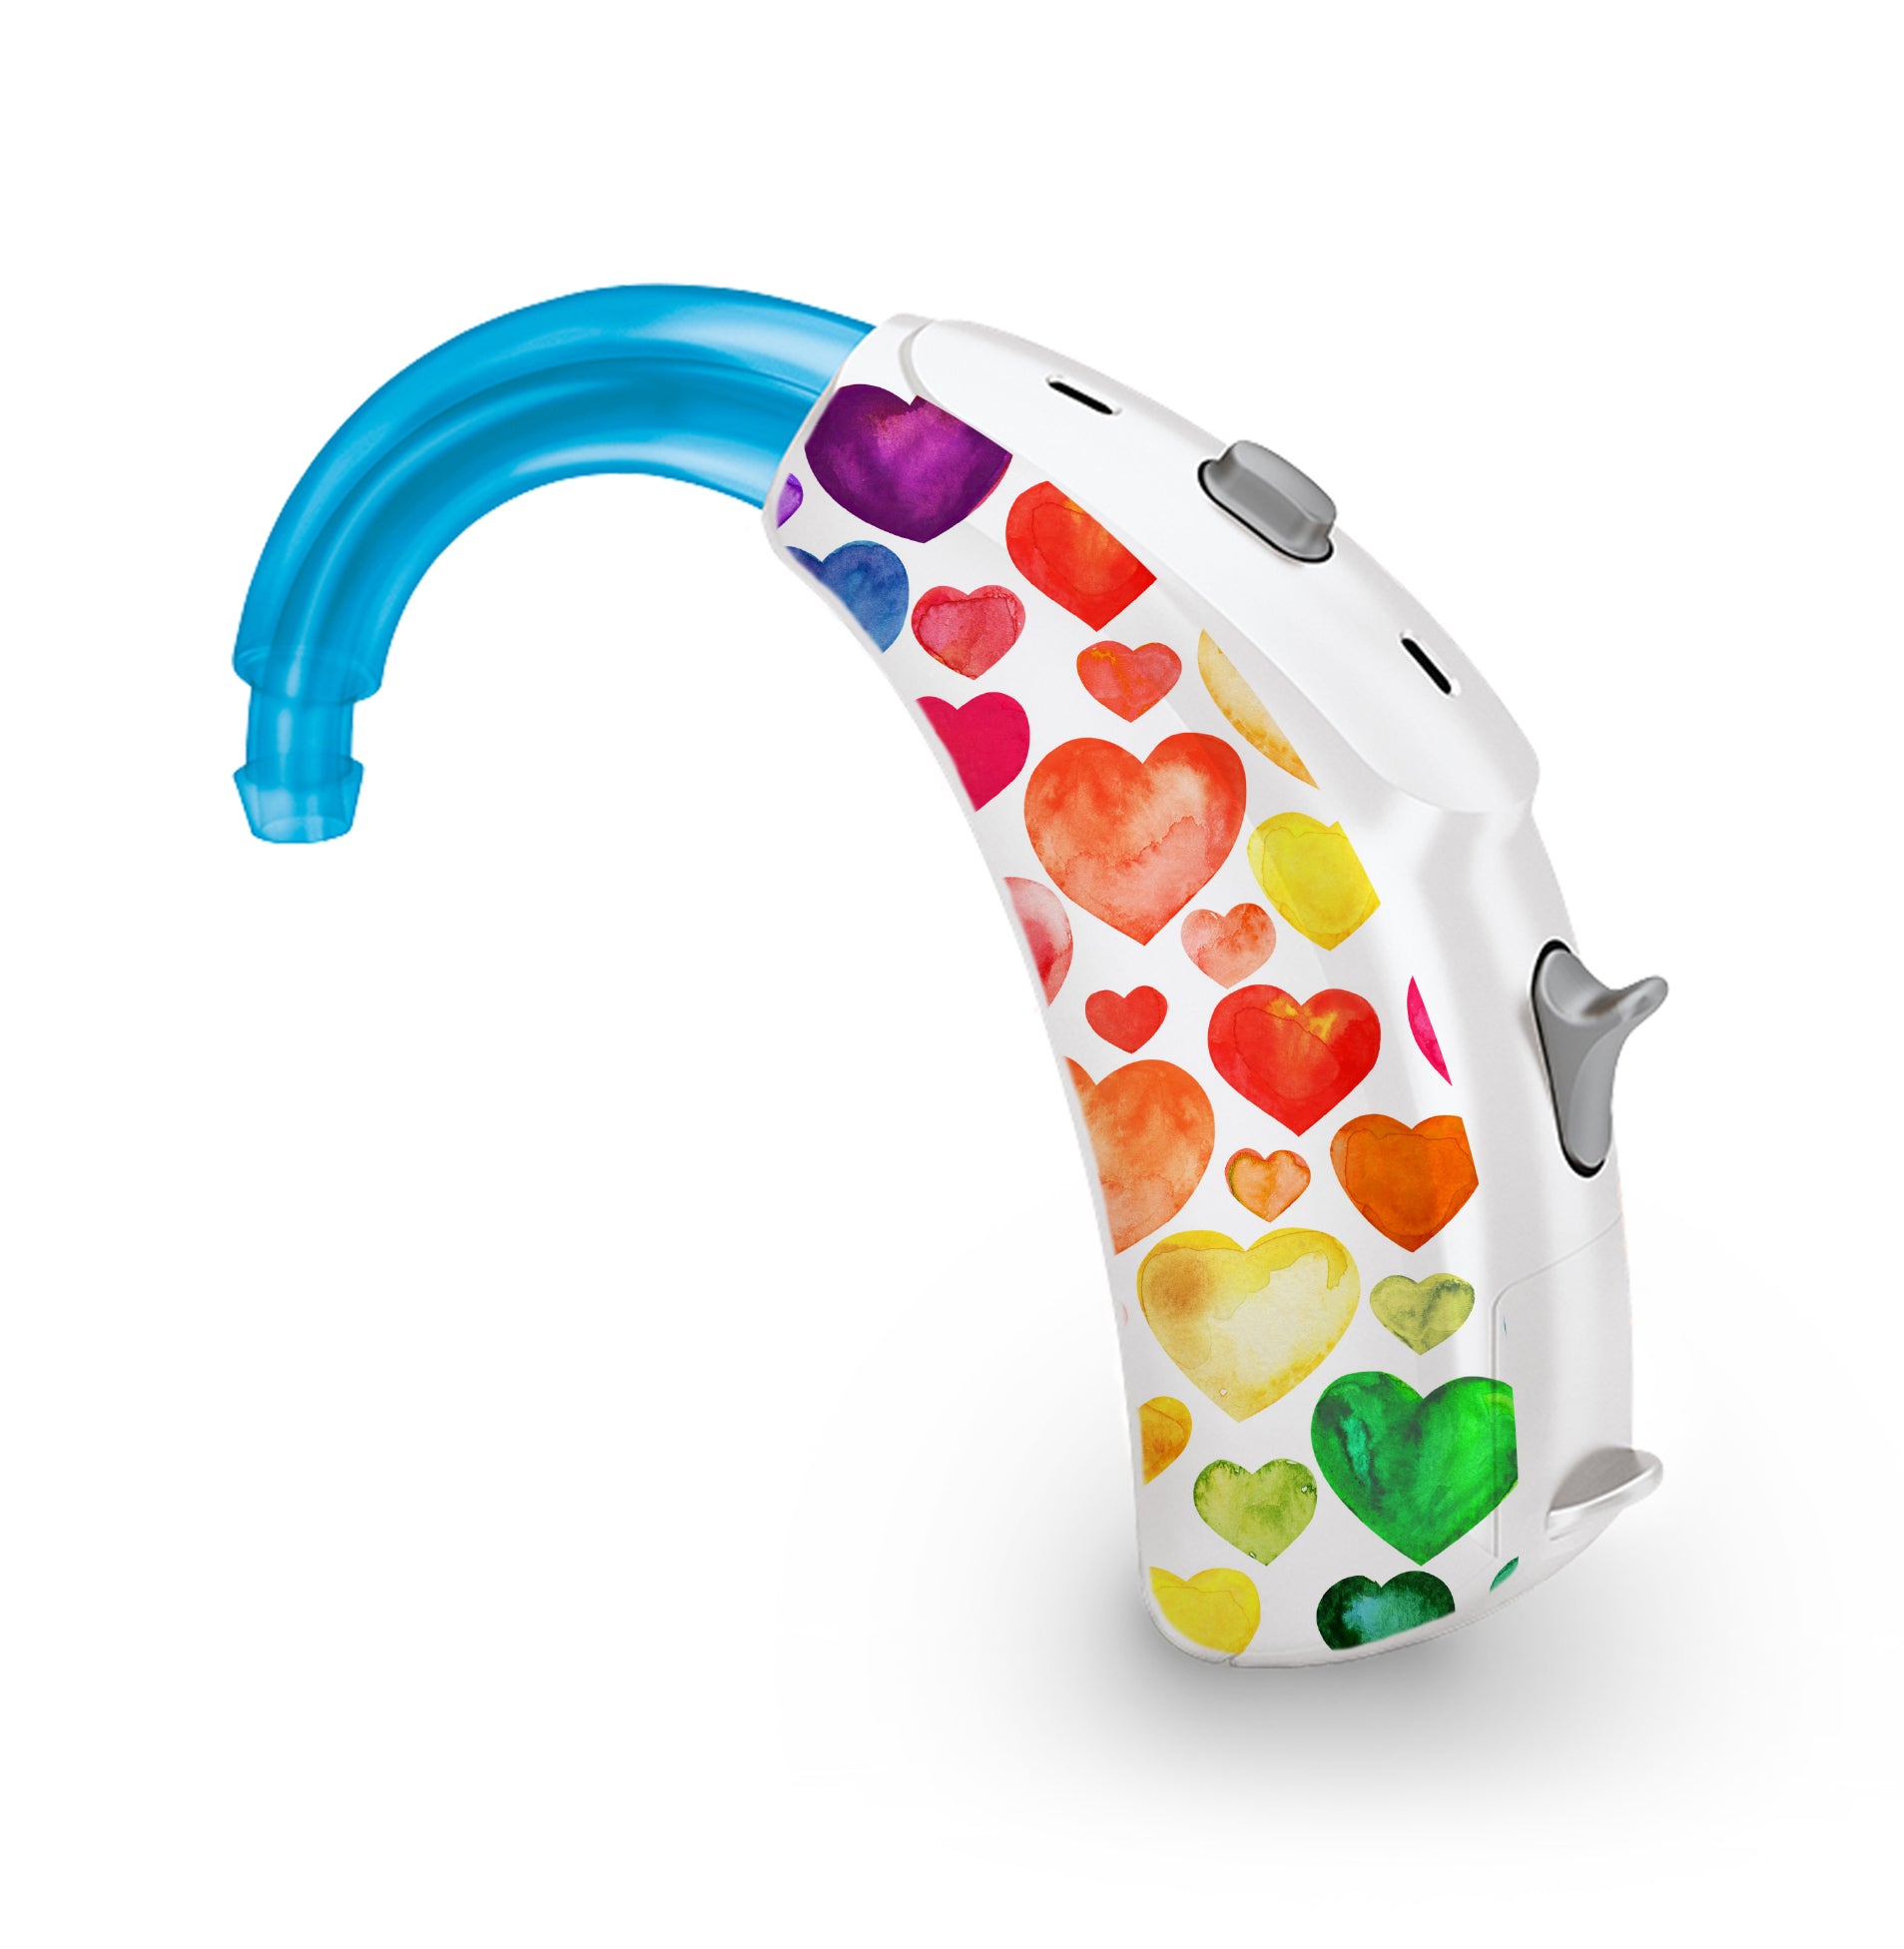 Deafmetal USA features HearSkins Hearoes brand hearing aid and cochlear implant stickers and skins to decorate hearing devices Rainbow Heart Hearing Aid and CI Skins